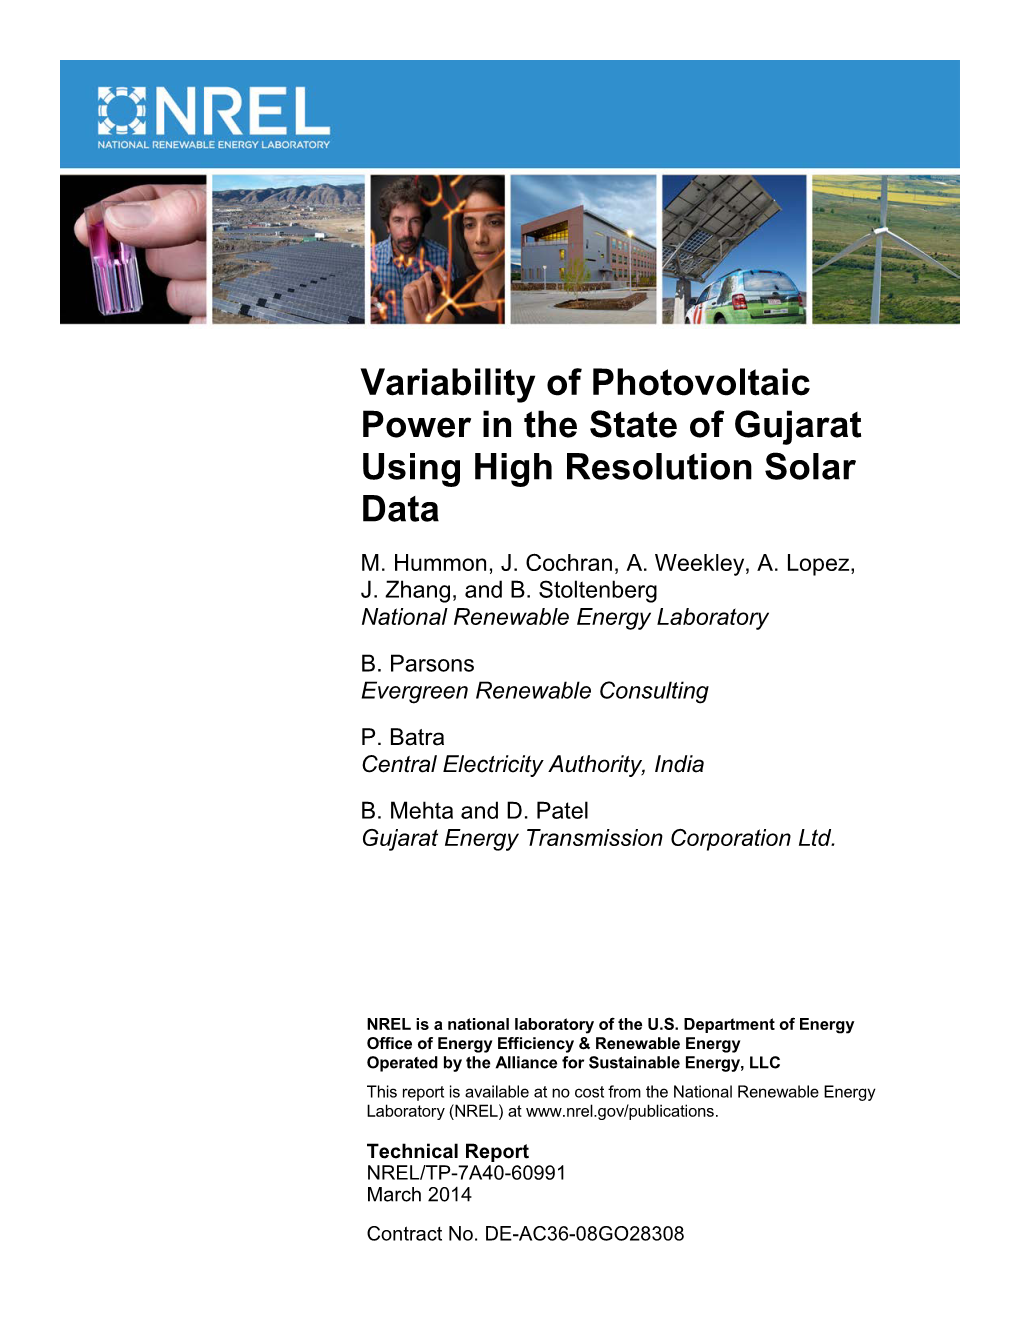 Variability of Photovoltaic Power in the State of Gujarat Using High Resolution Solar Data M